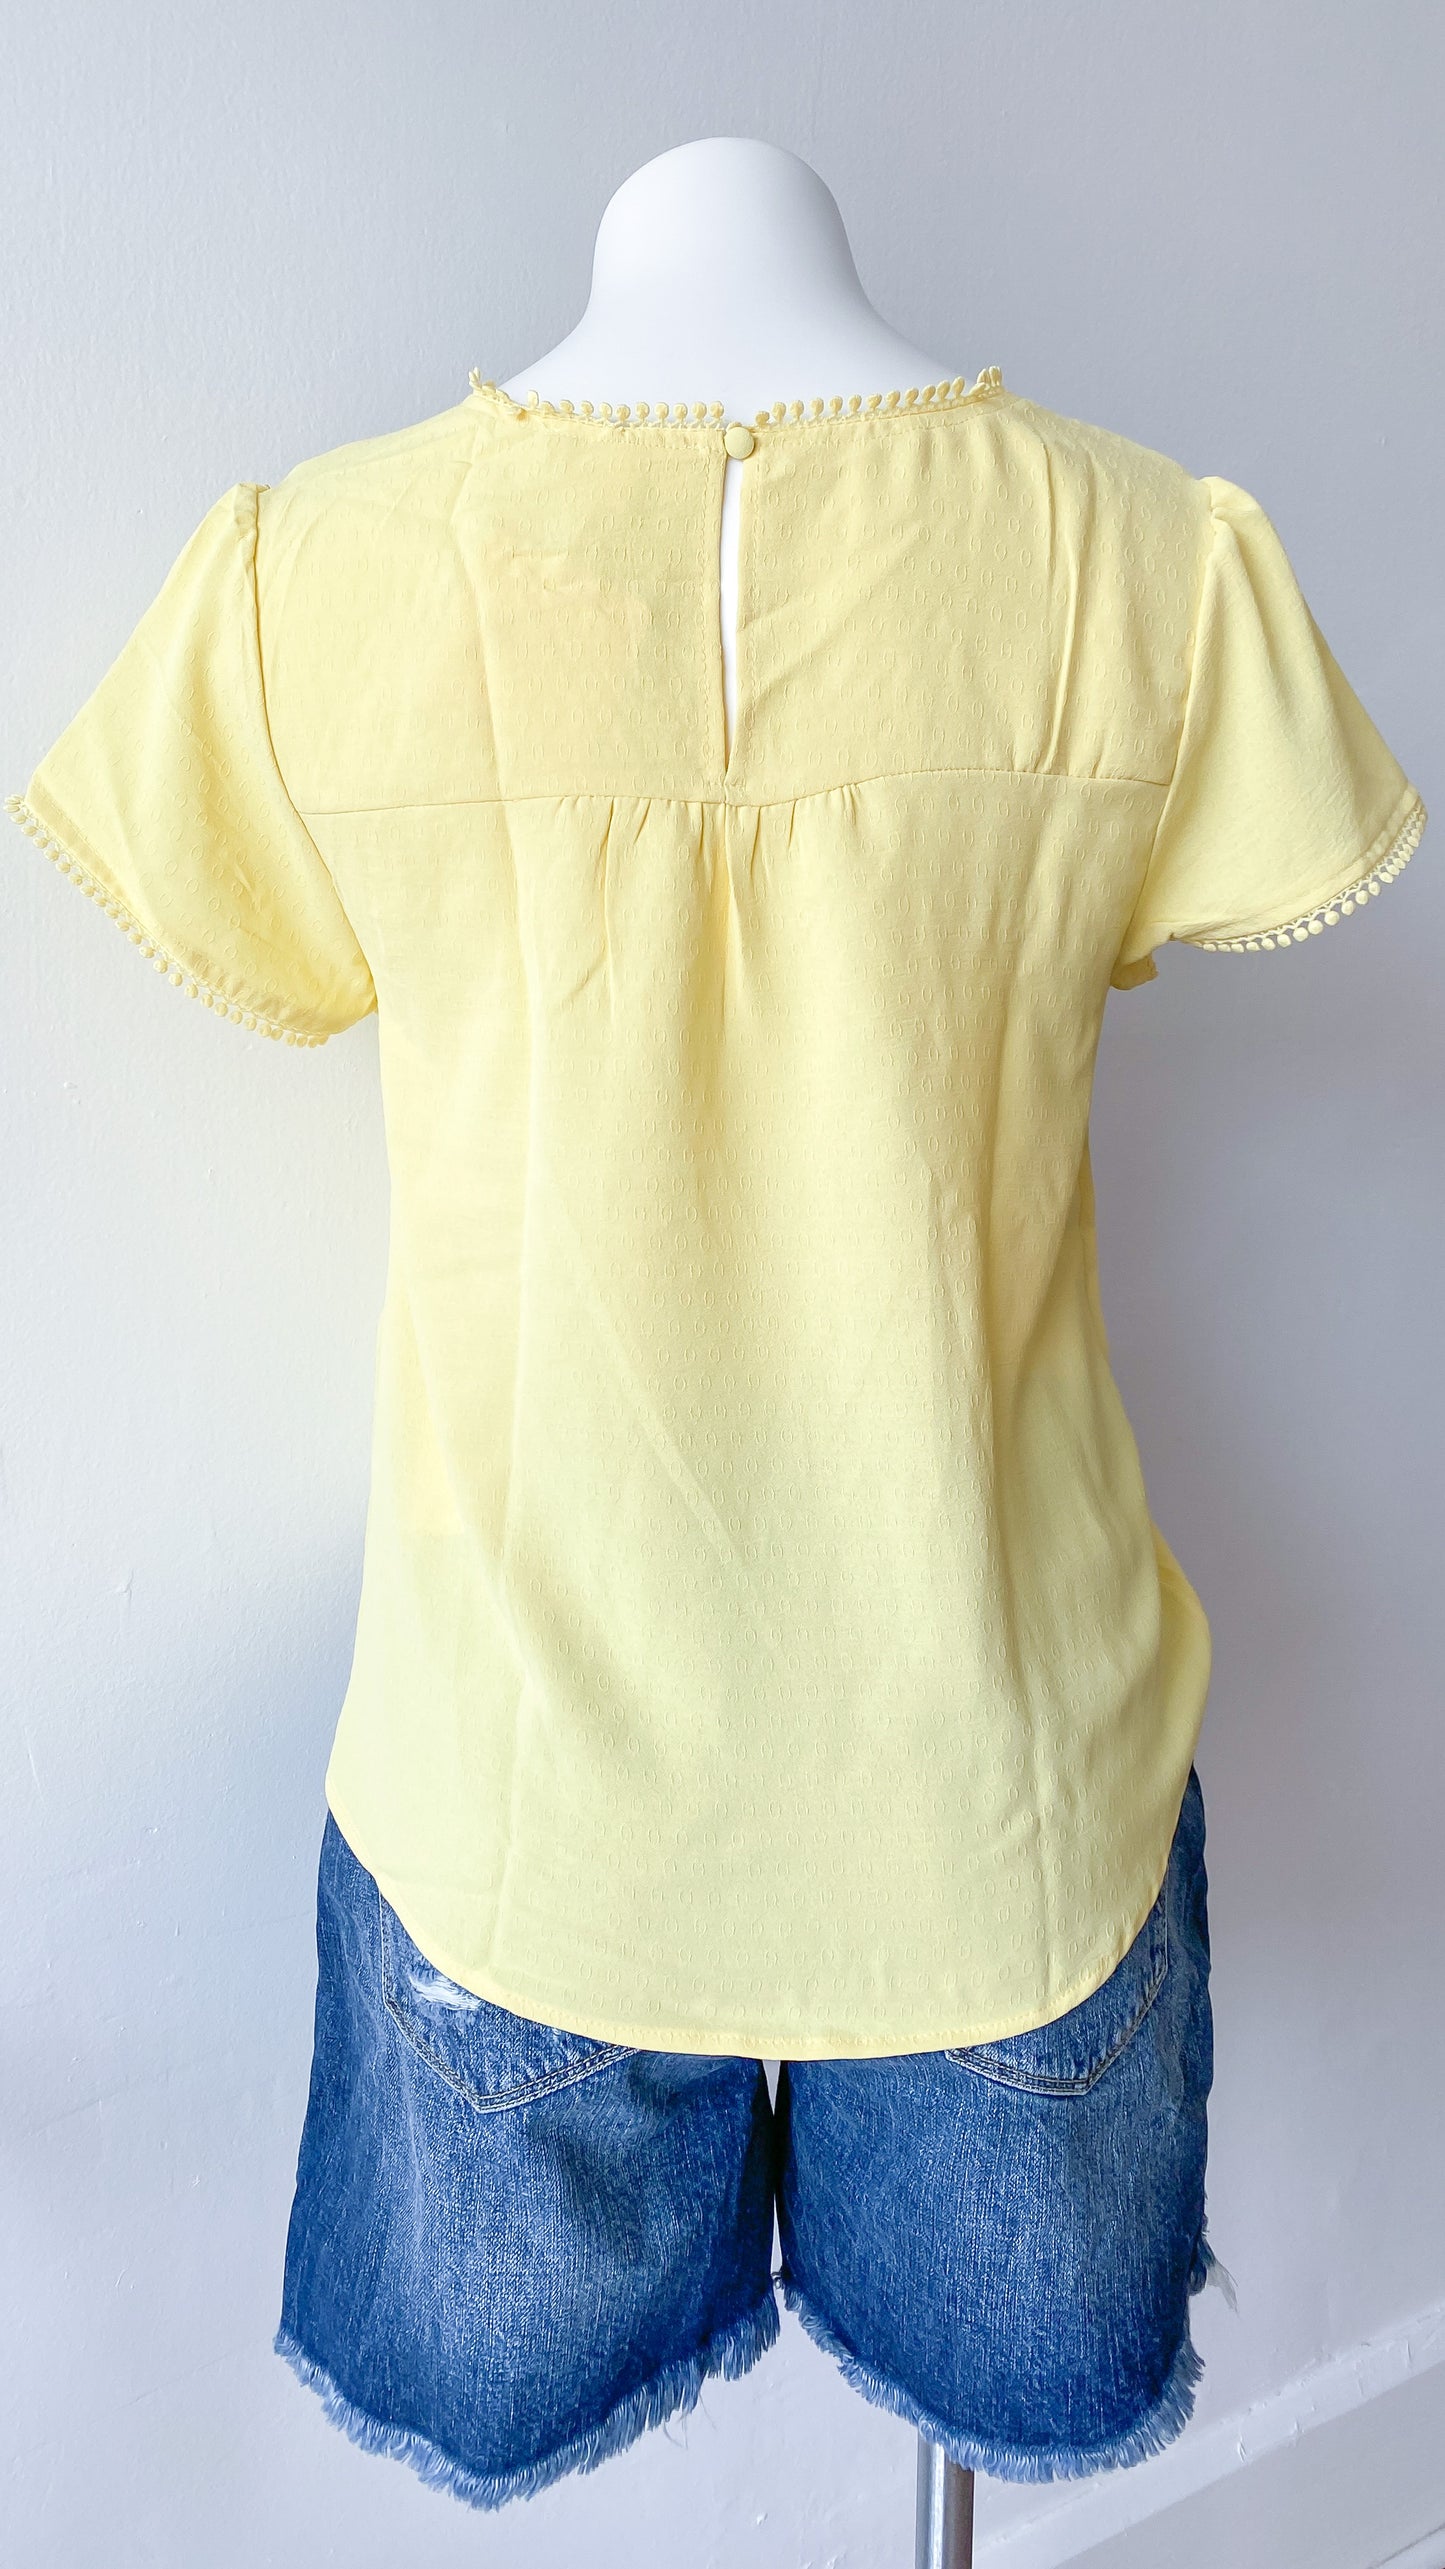 Embroidered Blouse - Yellow: Small-3XL